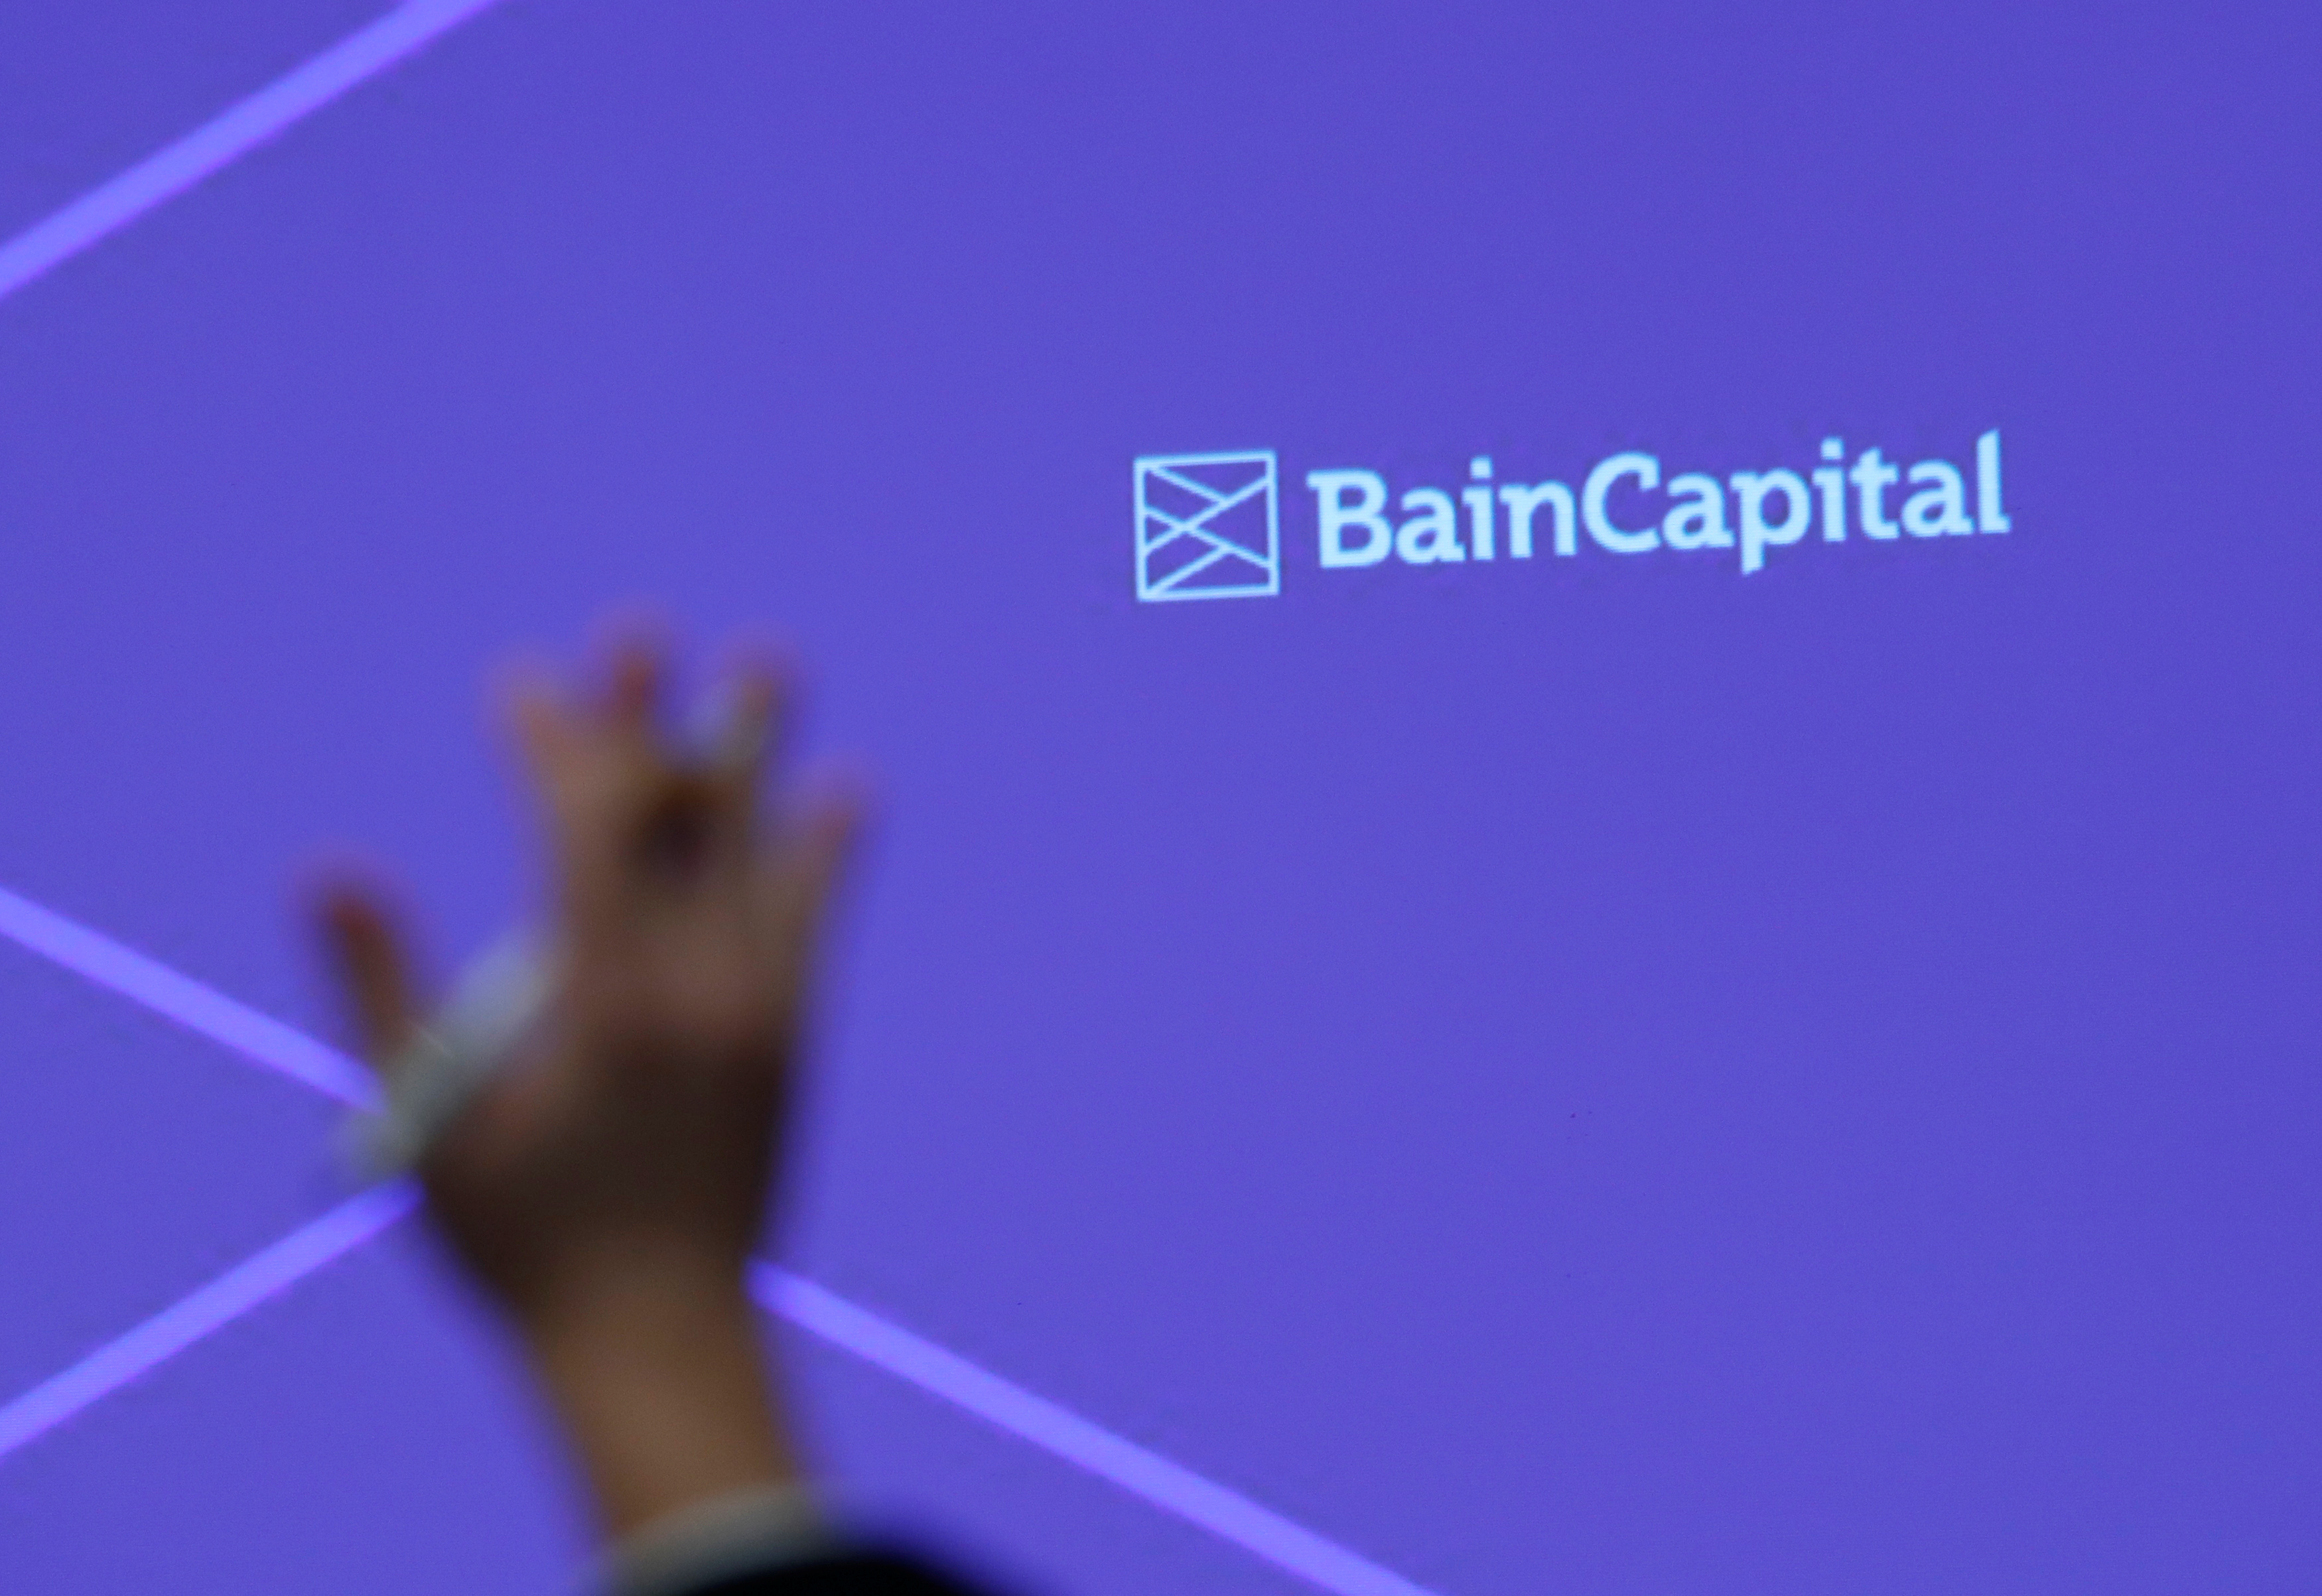 A reporter raises his hand to ask a question during a news conference by Bain Capital LP Managing Director Sugimoto in Tokyo